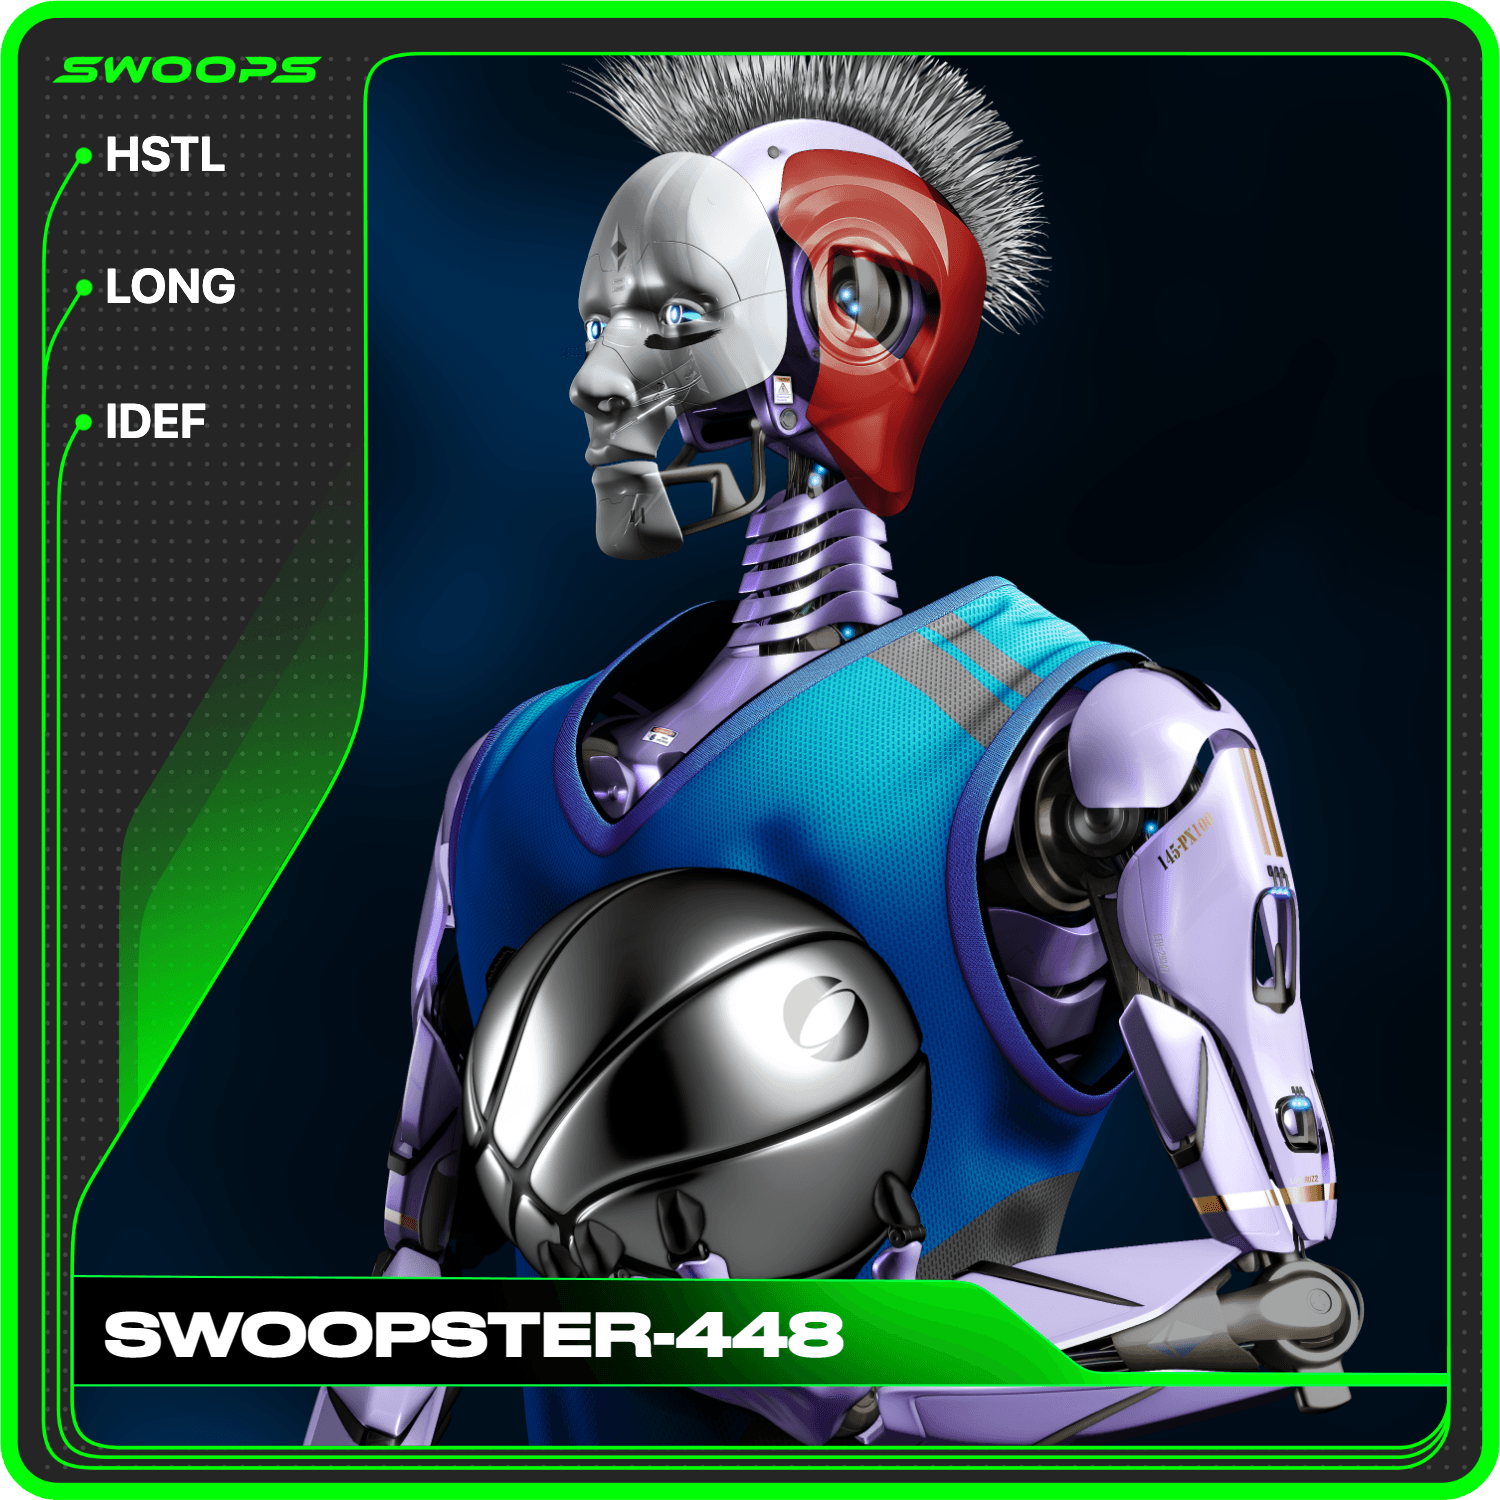 SWOOPSTER-448